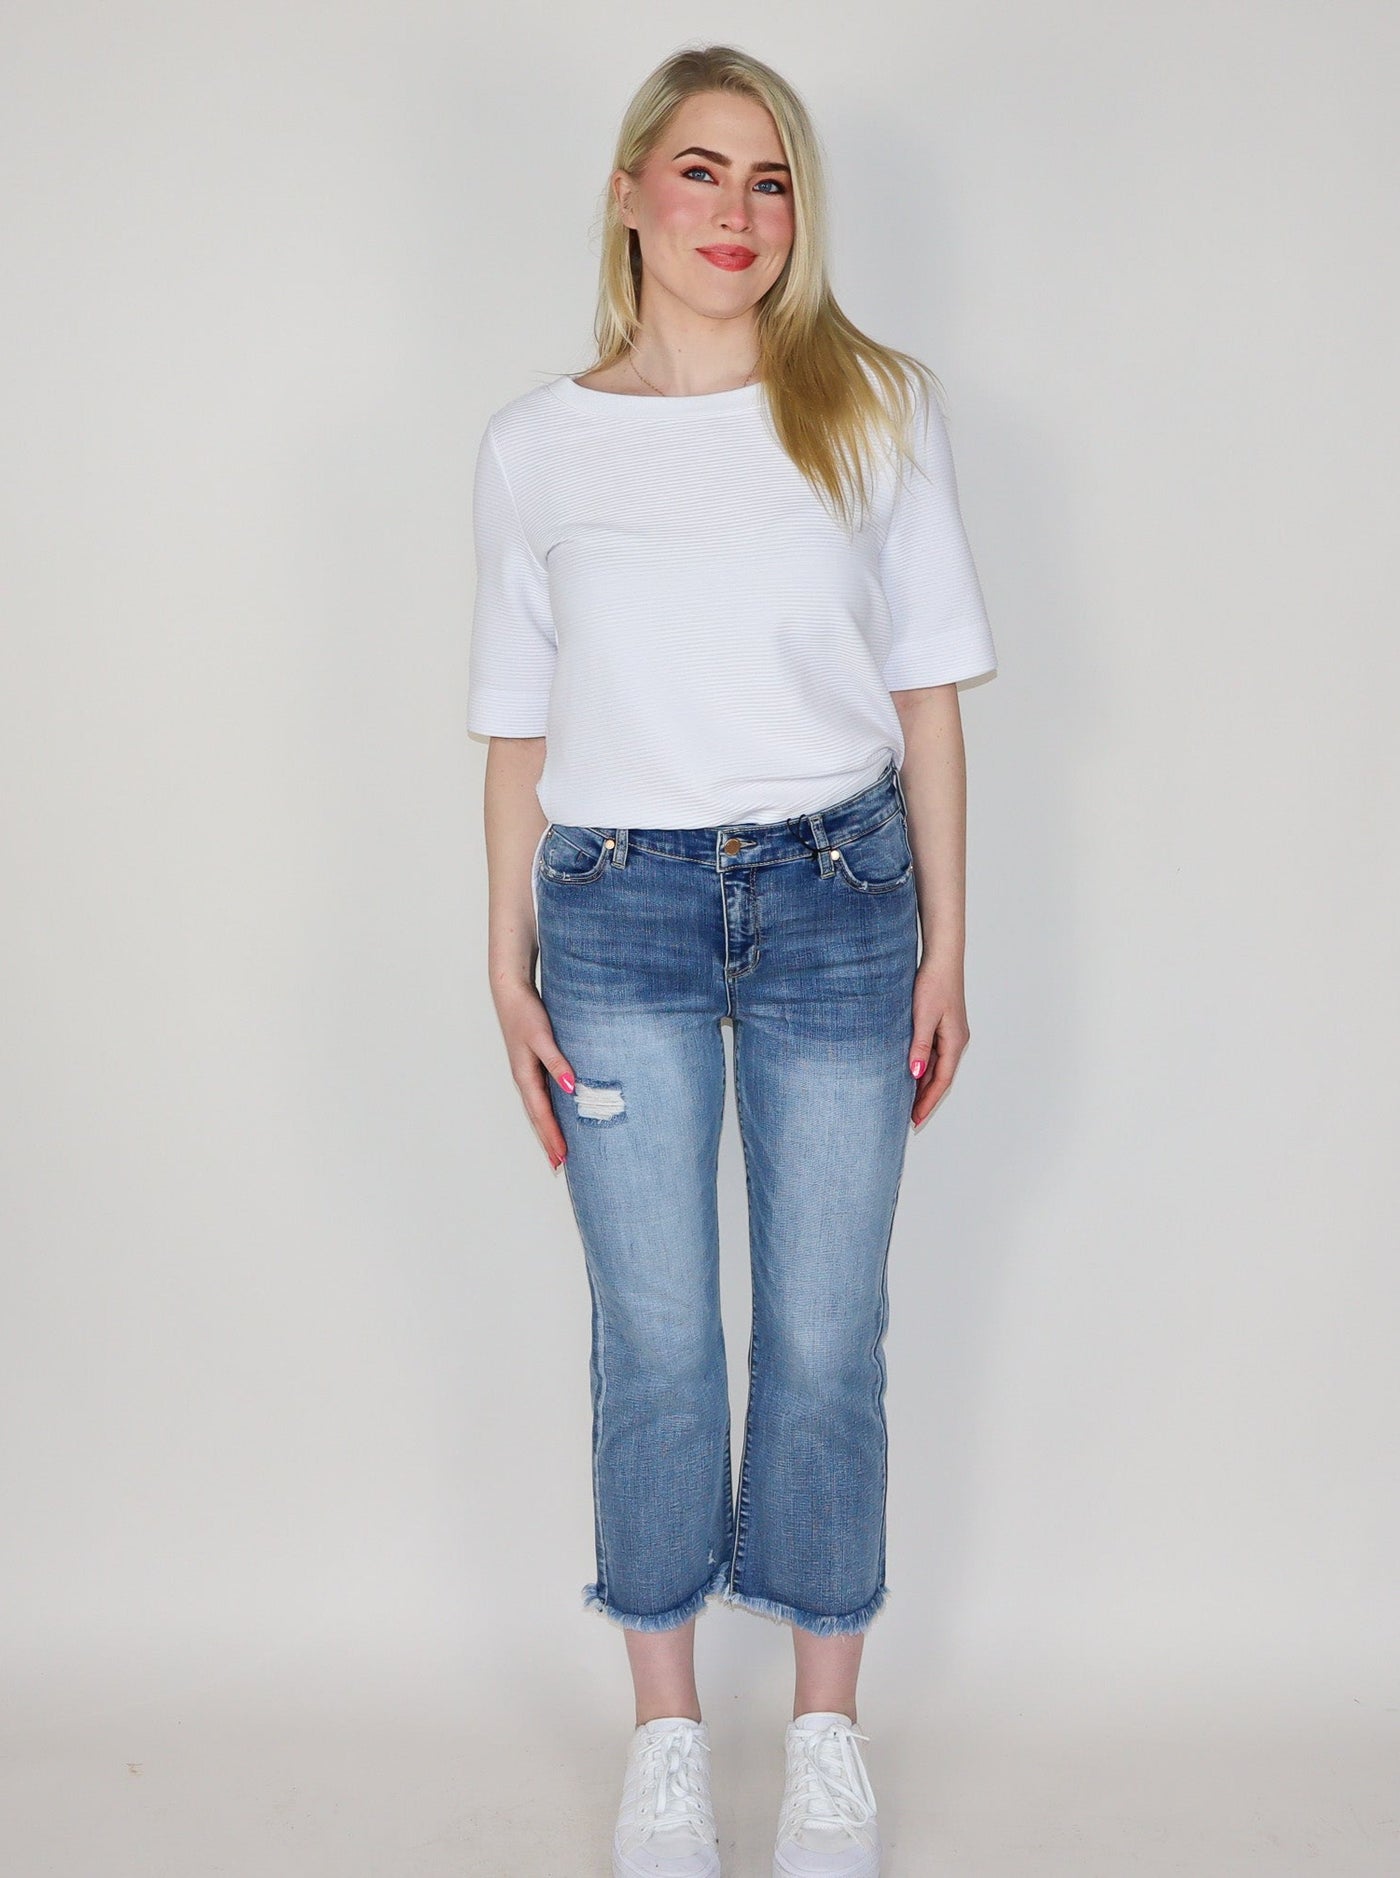 Model is wearing light washed distressed jeans. Jeans are paired with a white top and white sneakers.